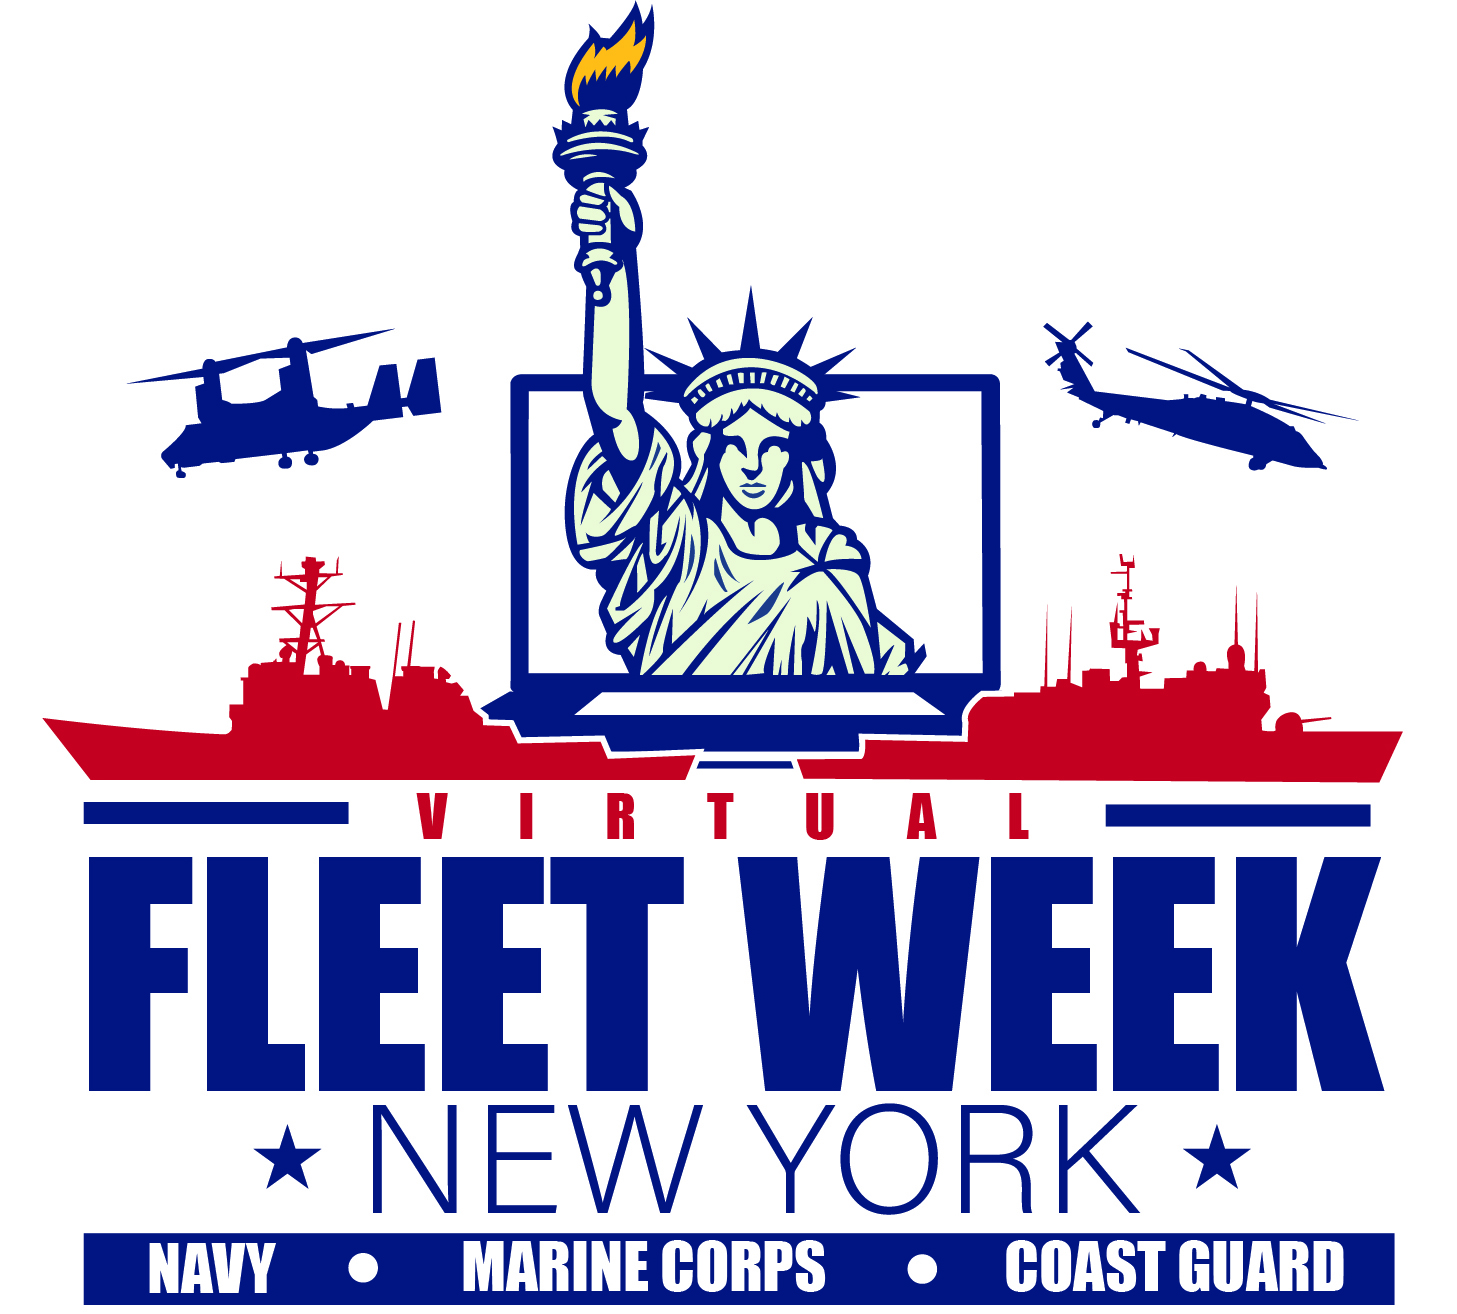 Fleet Week Logo White background Blue Outline of Statue of Liberty, blue helicopters and red ships